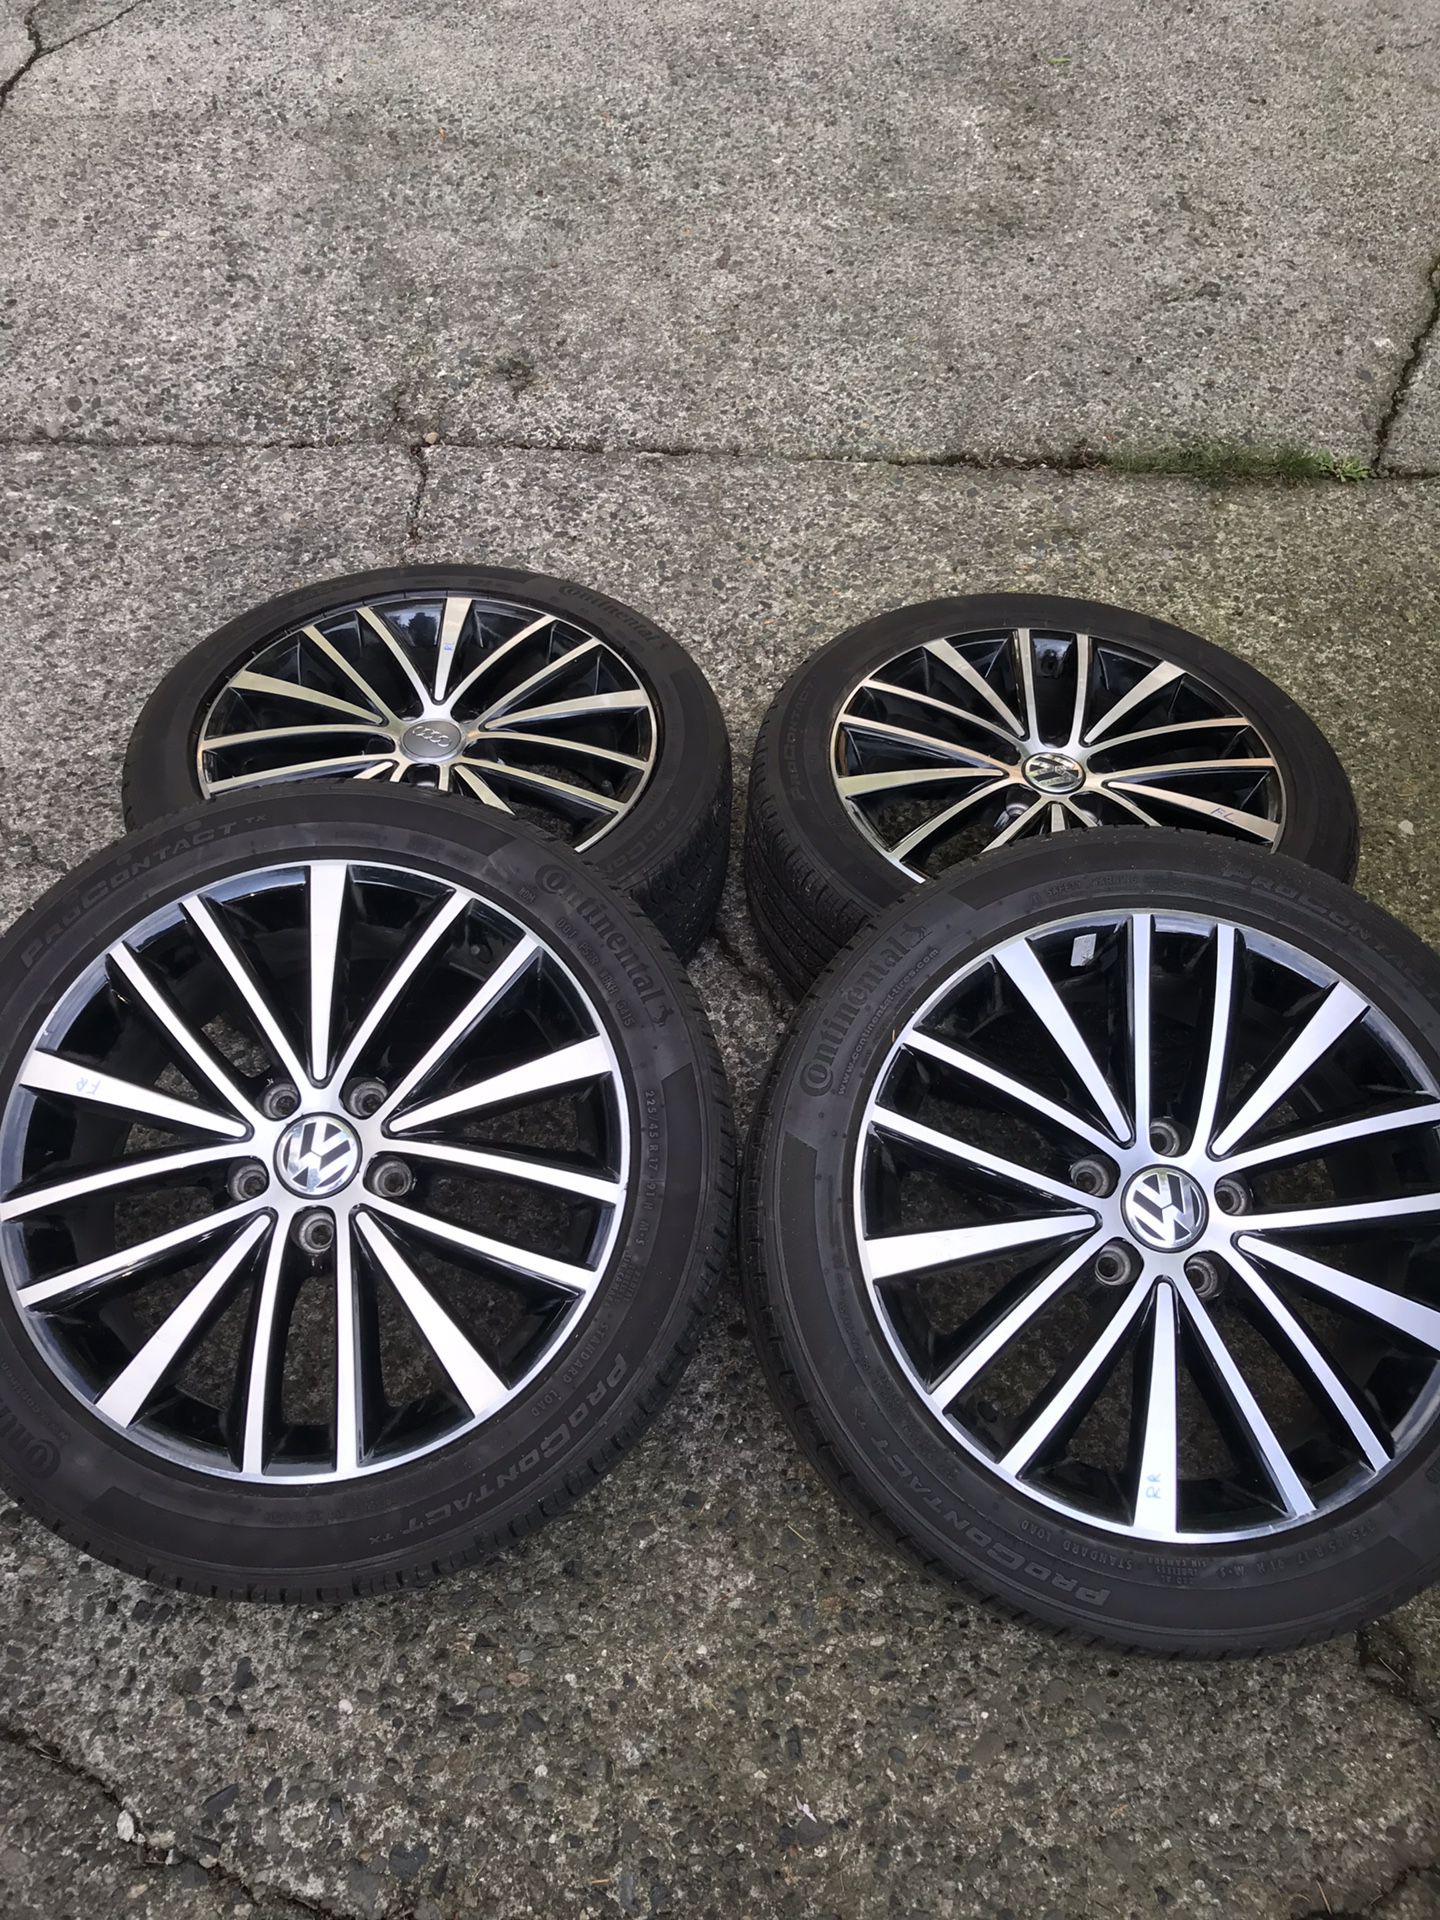 VW or AUDI wheels with all season continental tires